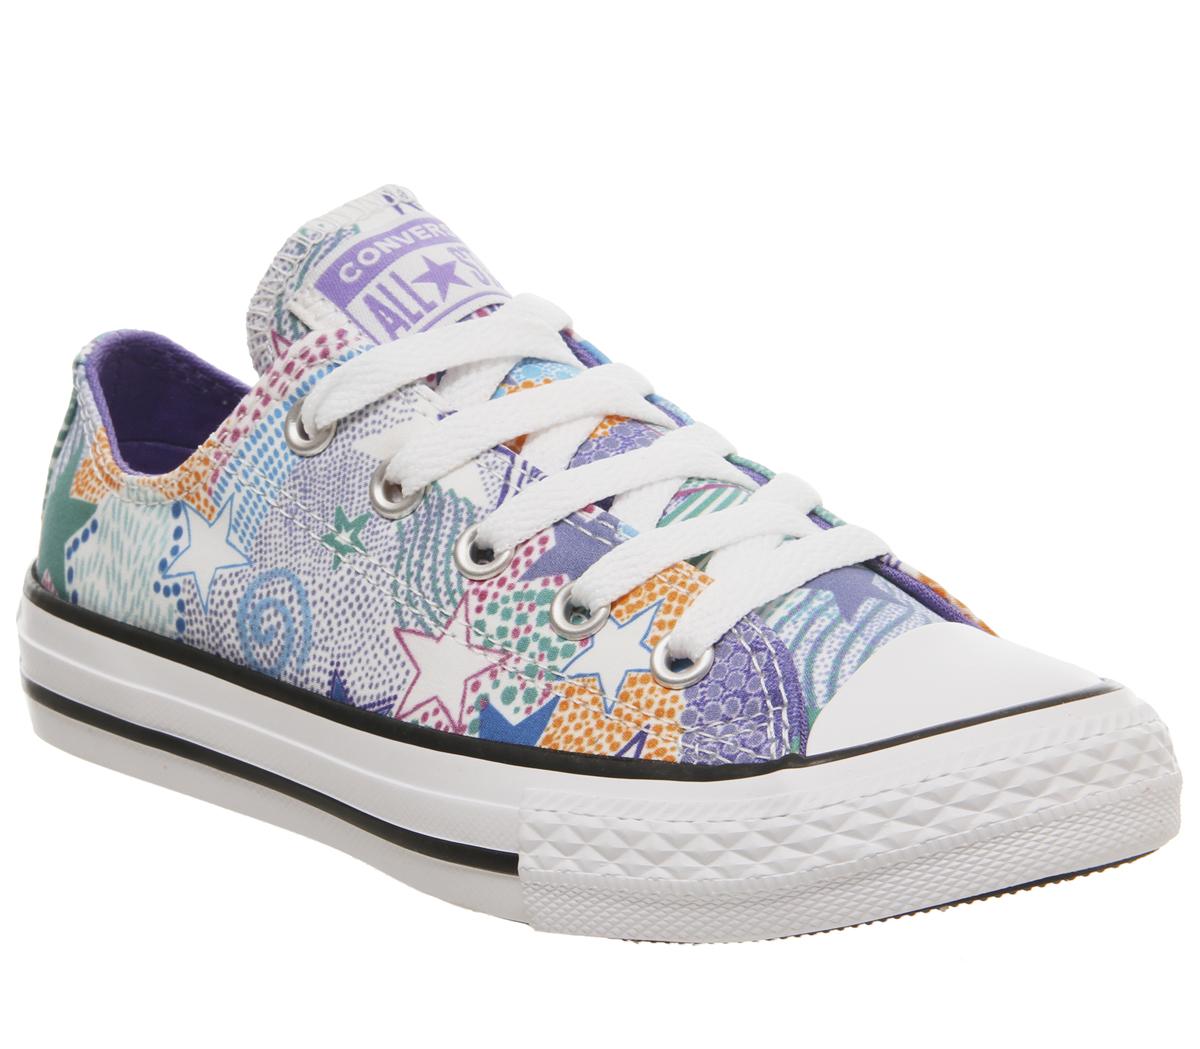 ConverseAll Star Low Youth TrainersWhite Wild Lilac Black